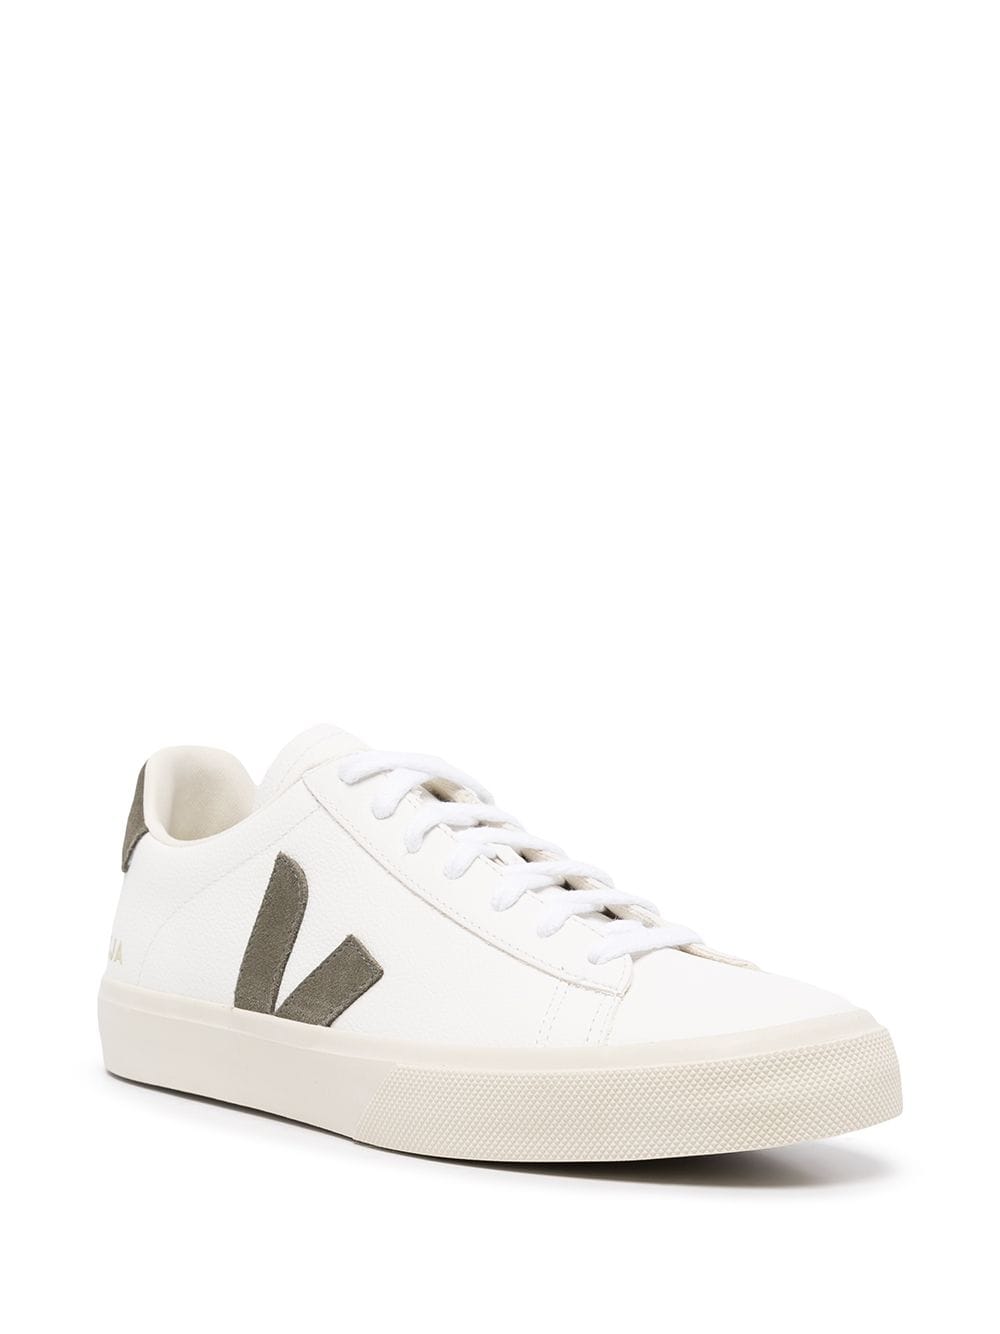 Campo leather sneakers<BR/><BR/><BR/>